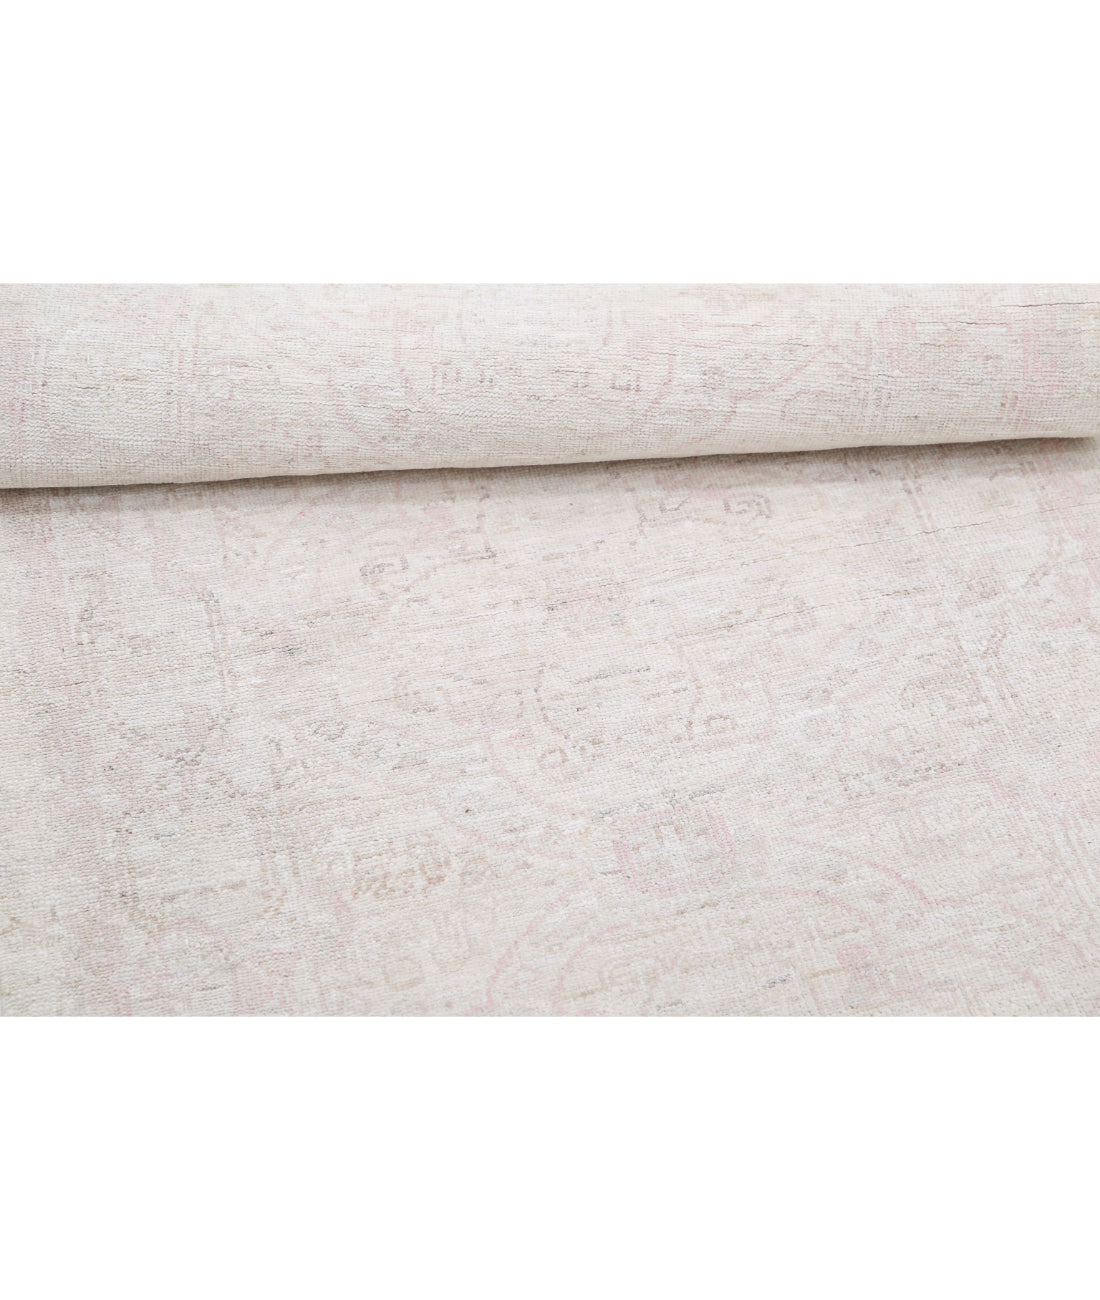 Hand Knotted Serenity Wool Rug - 2'8'' x 7'9'' 2'8'' x 7'9'' (80 X 233) / Ivory / Pink